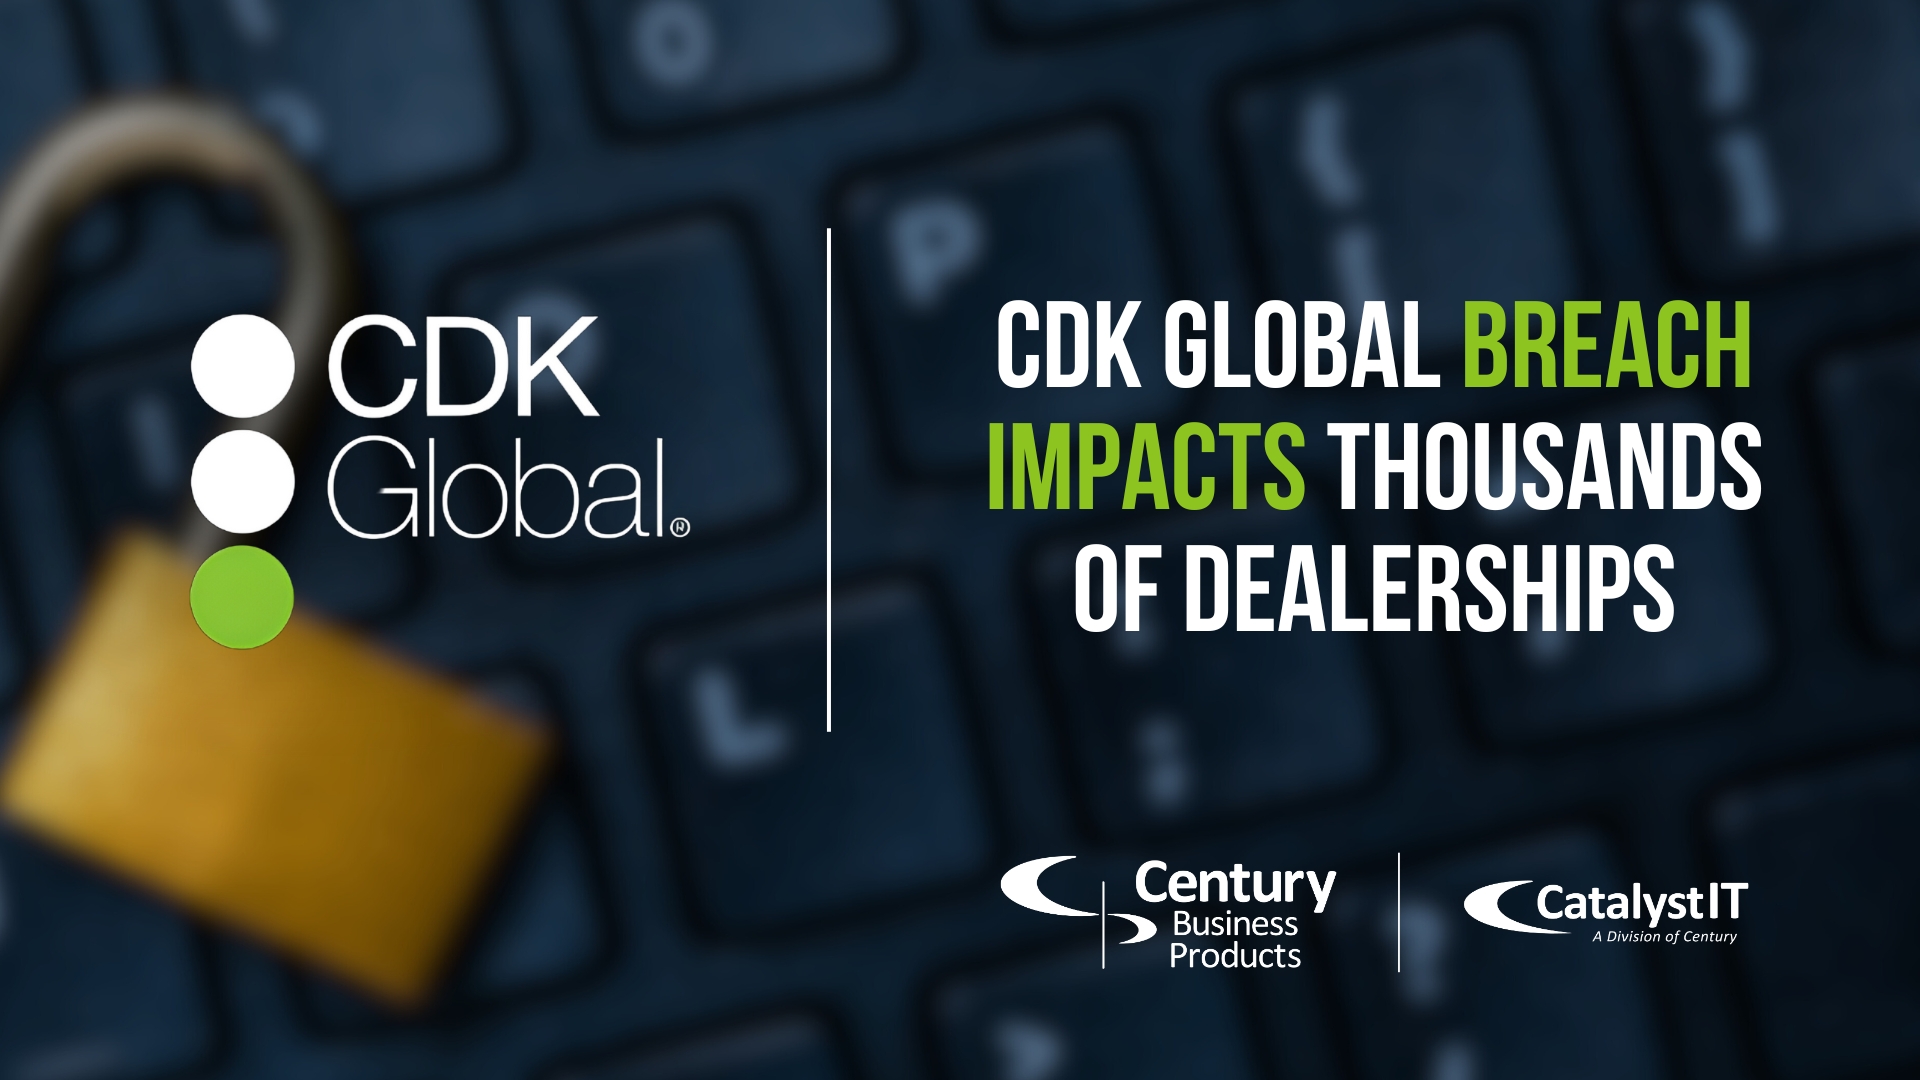 CDK Global Breach Impacts Thousands of Dealerships